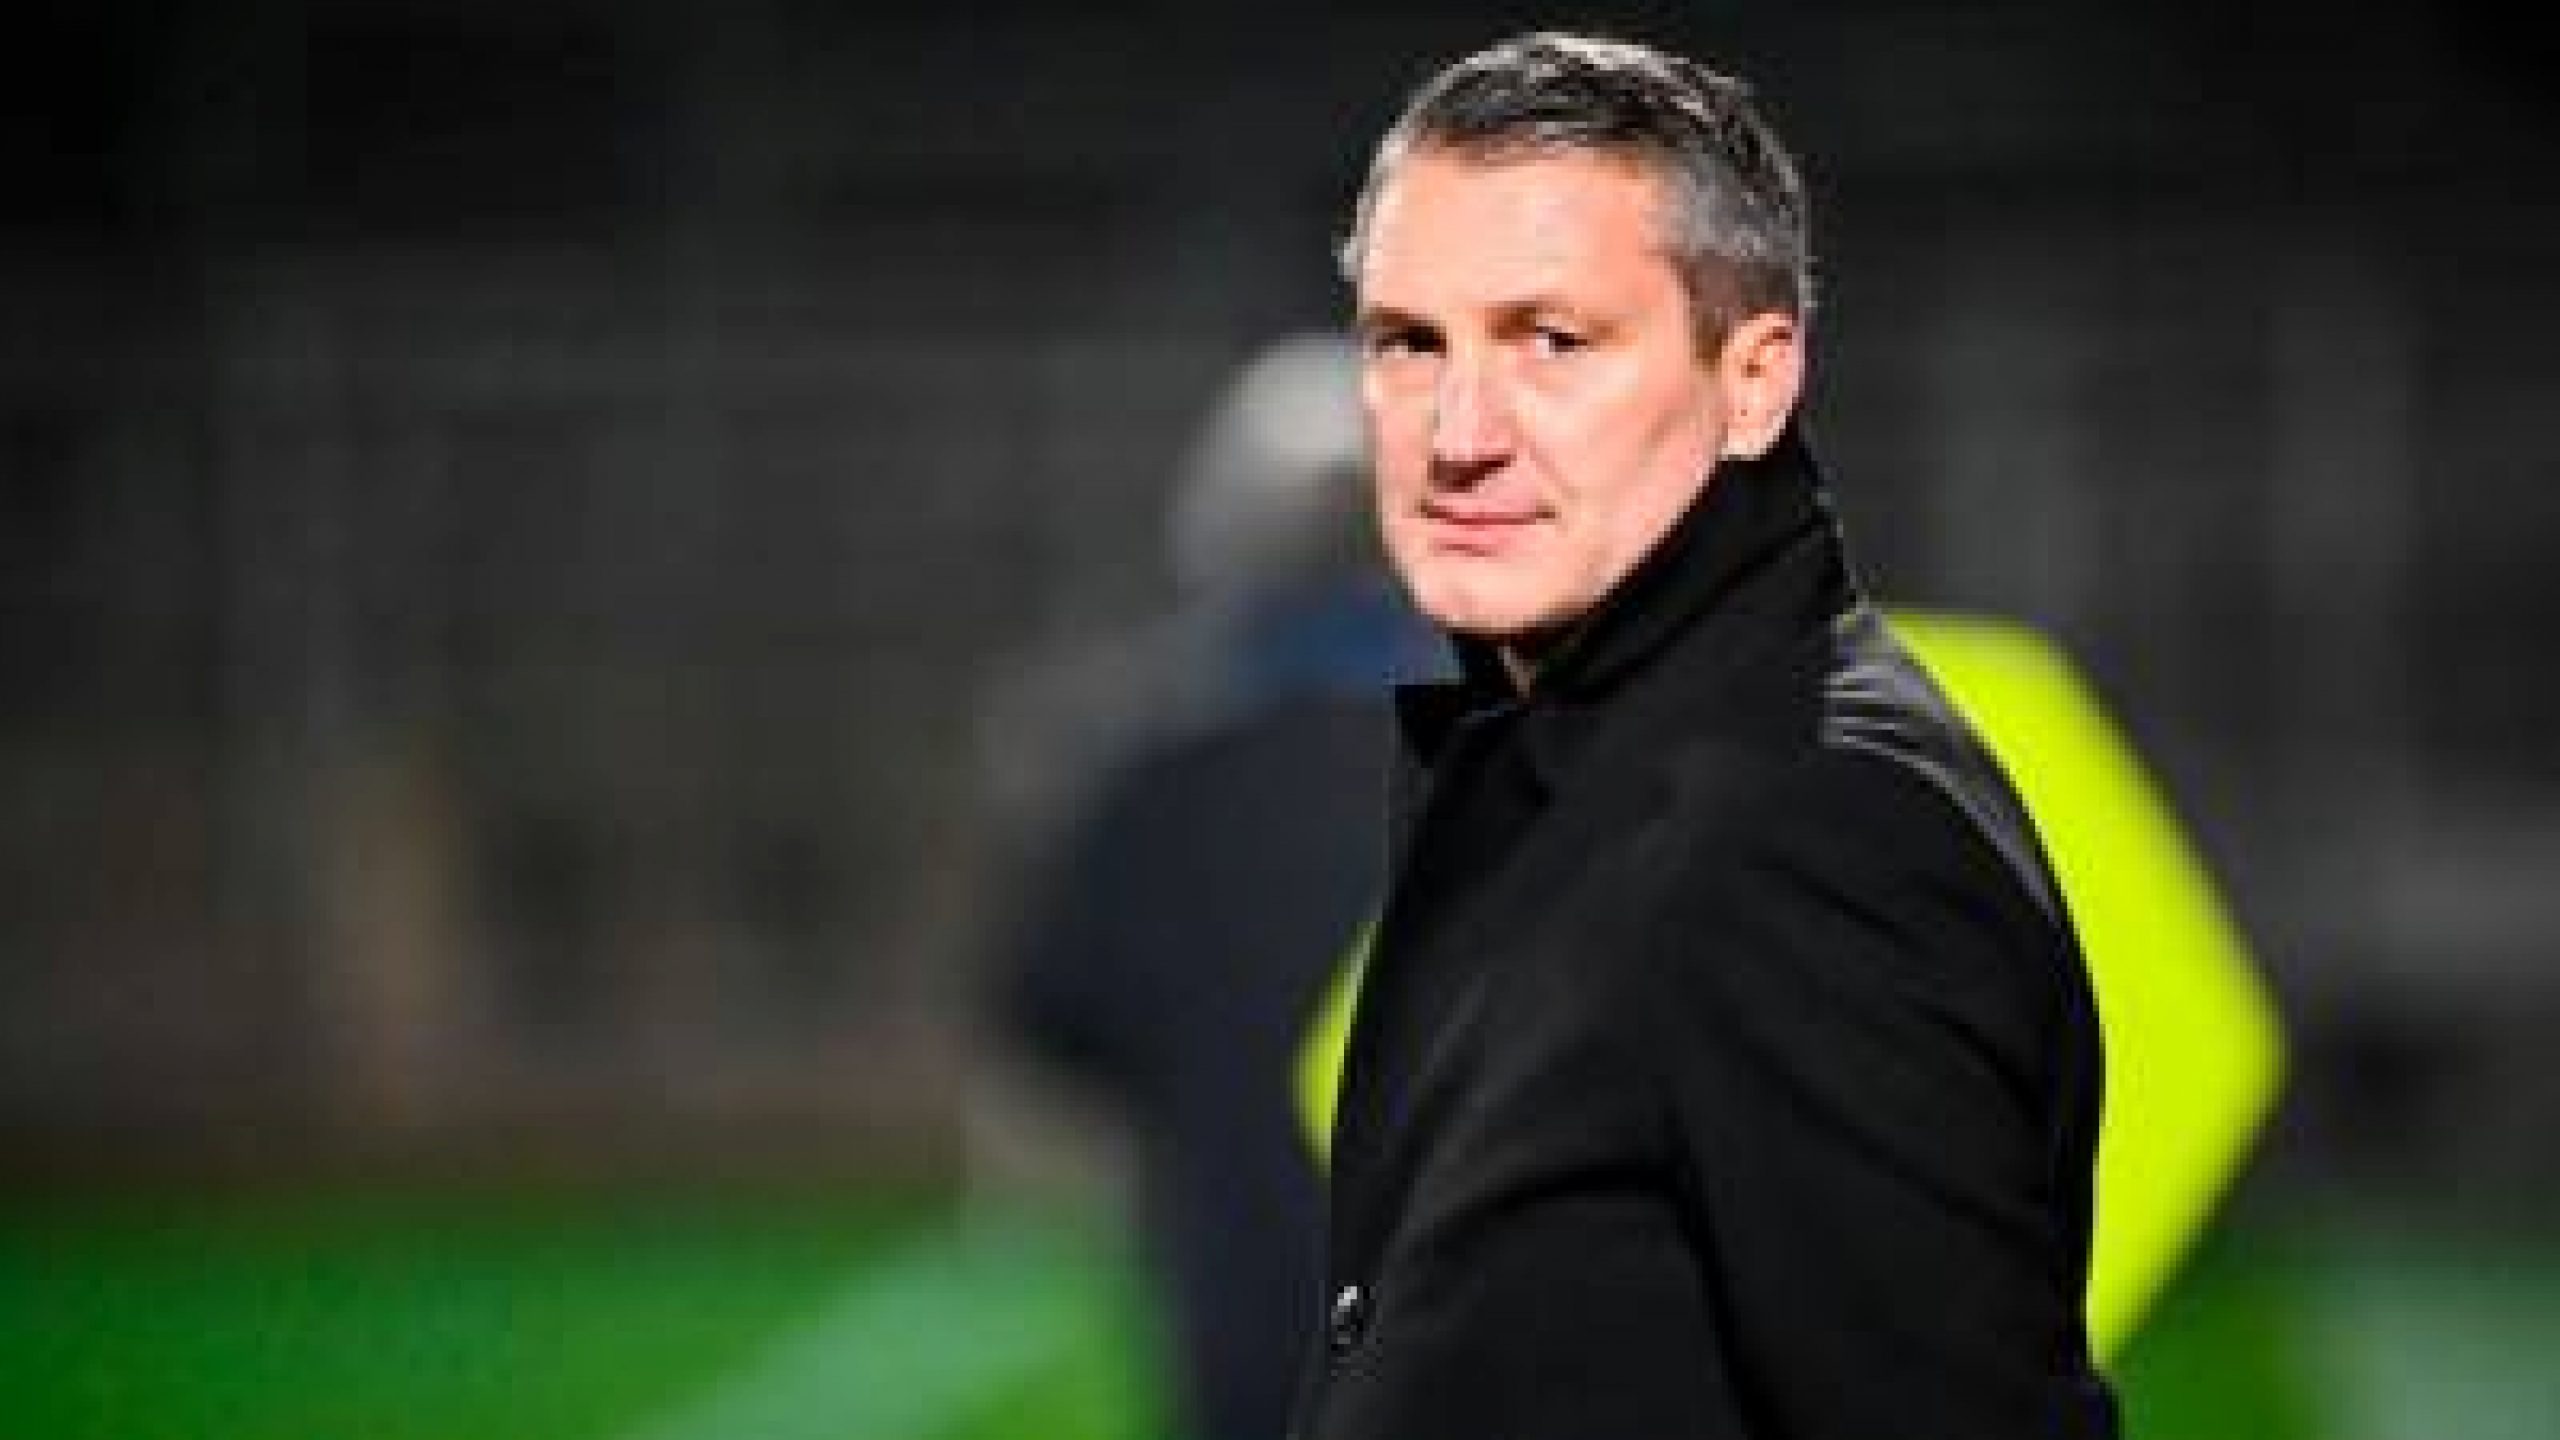 Lille can’t convince coach Galtier to stay: club president